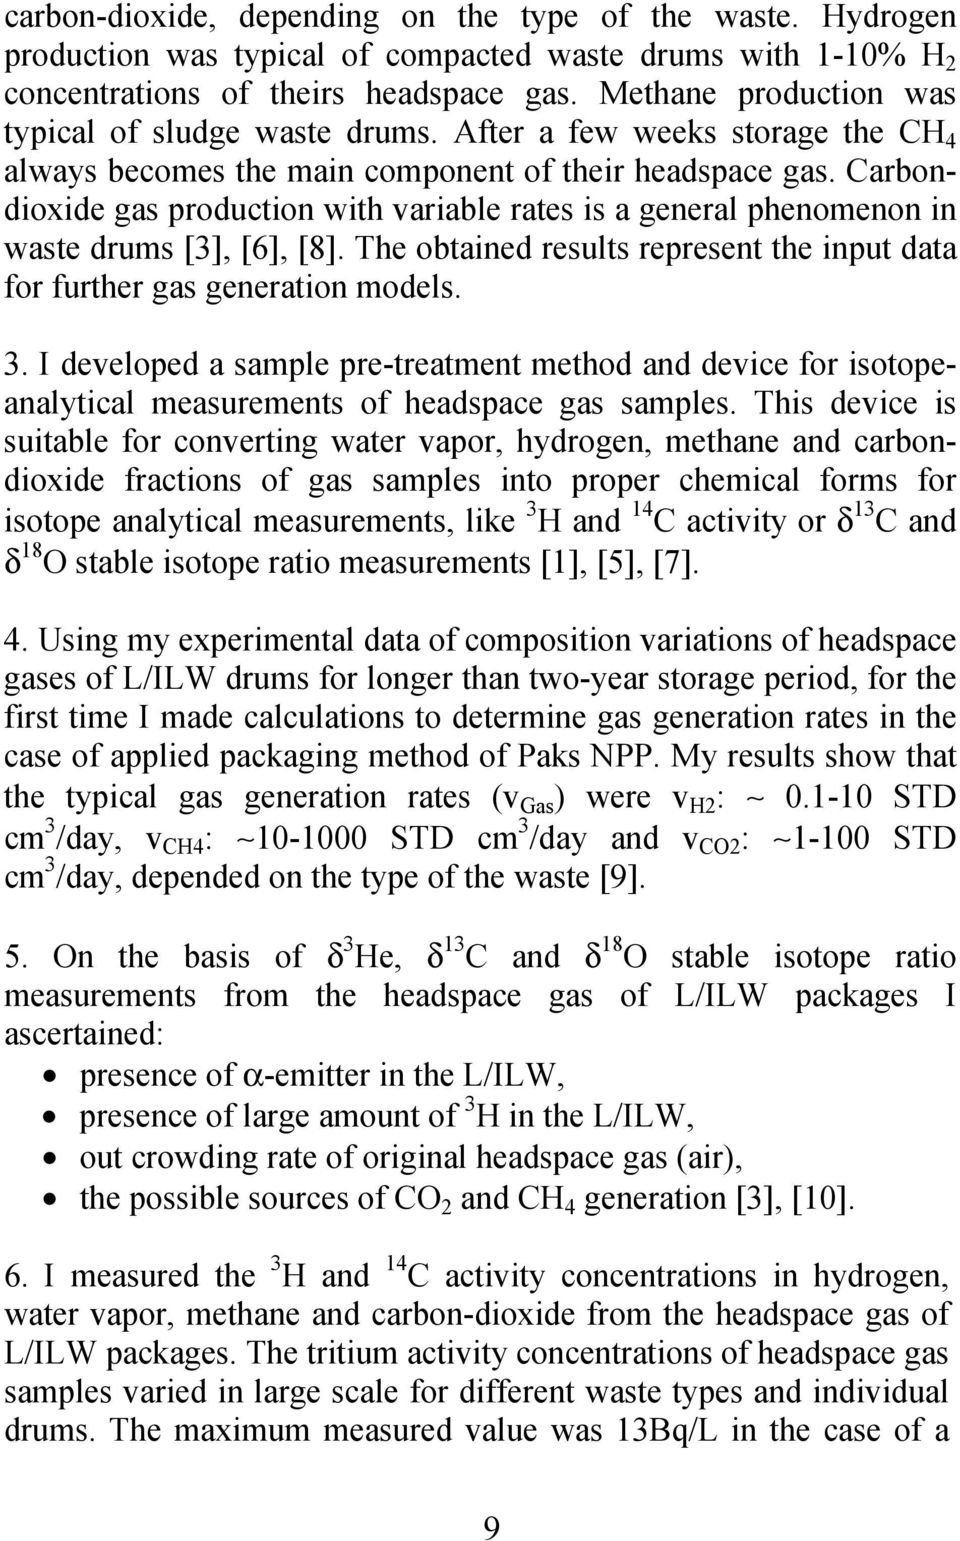 Carbondioxide gas production with variable rates is a general phenomenon in waste drums [3], [6], [8]. The obtained results represent the input data for further gas generation models. 3.